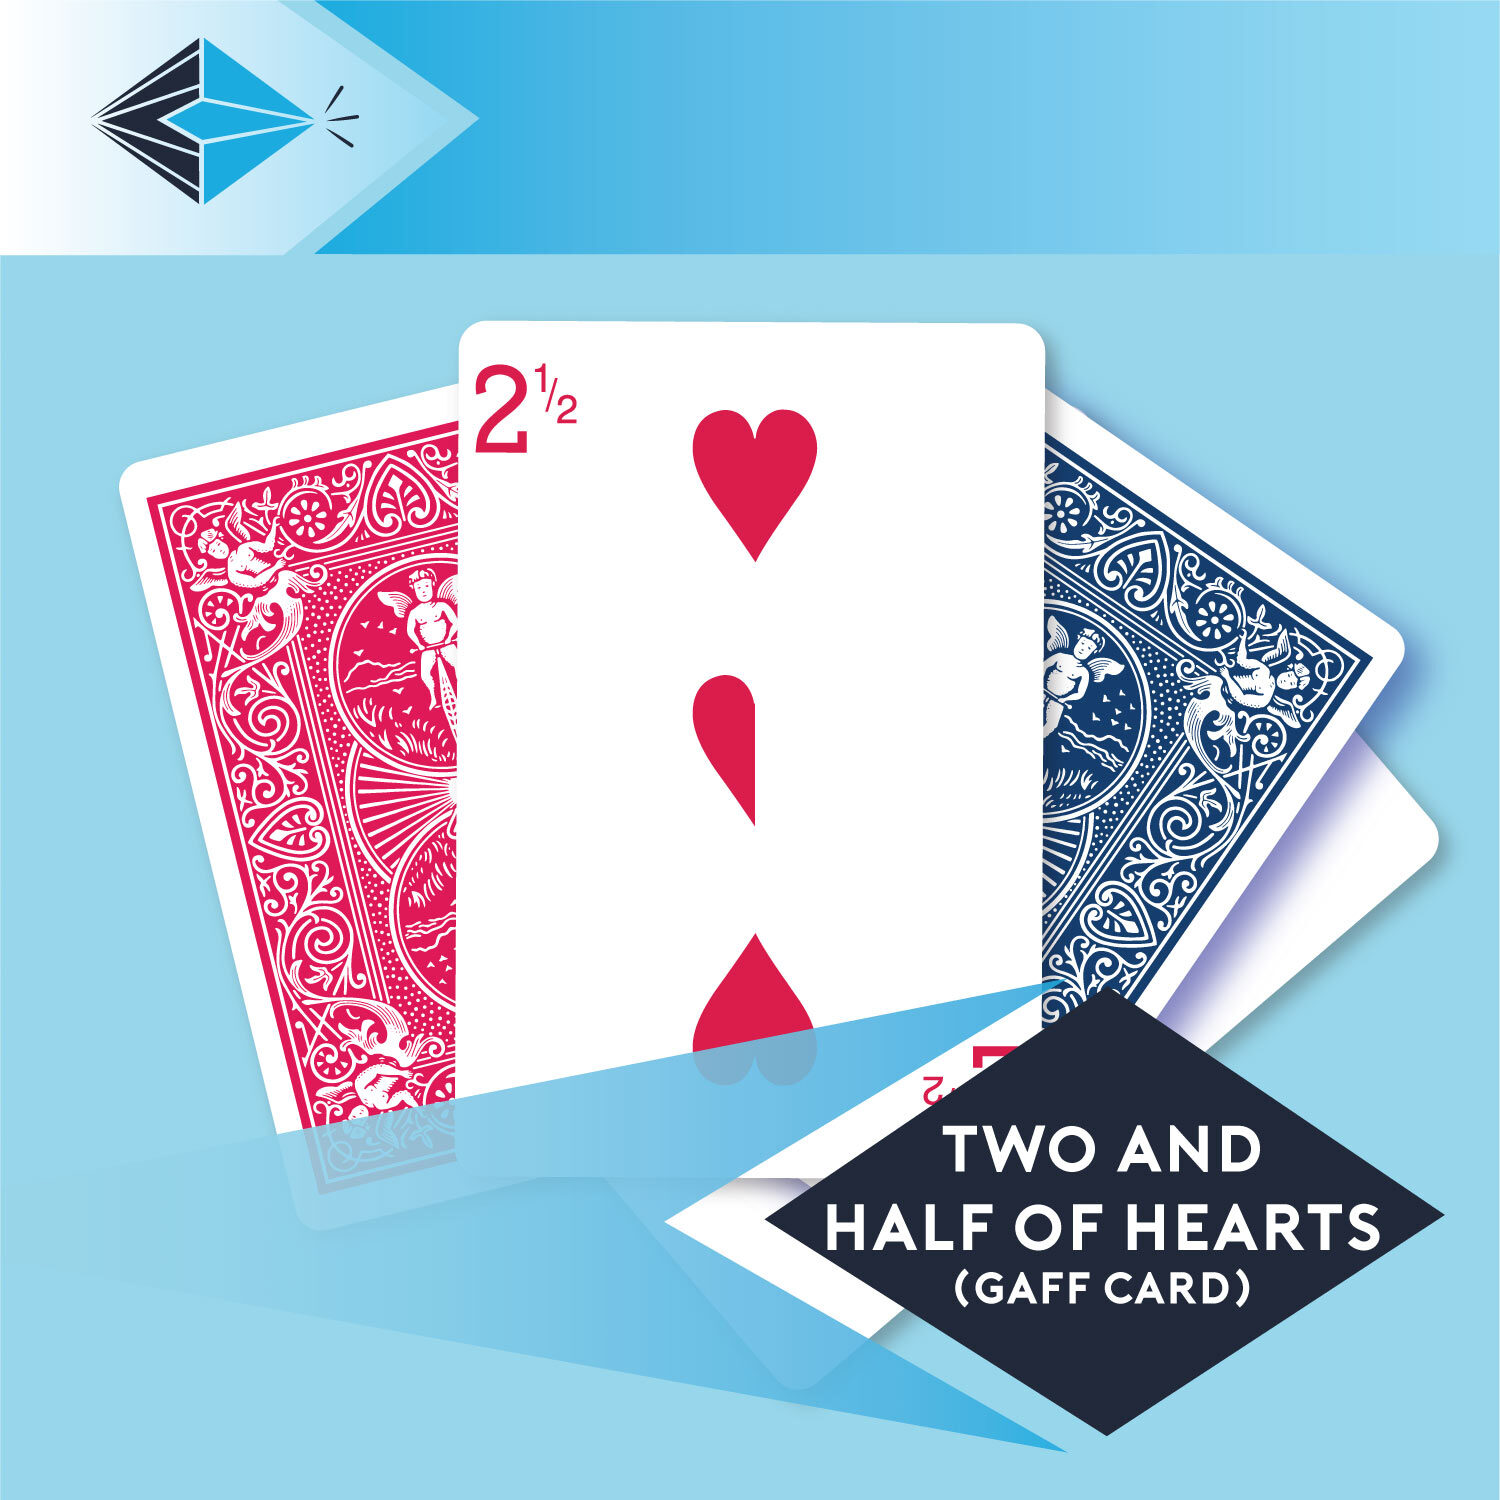 two and half of hearts gaff card 25 playing card for magicians printing printers Stockport Manchester UK